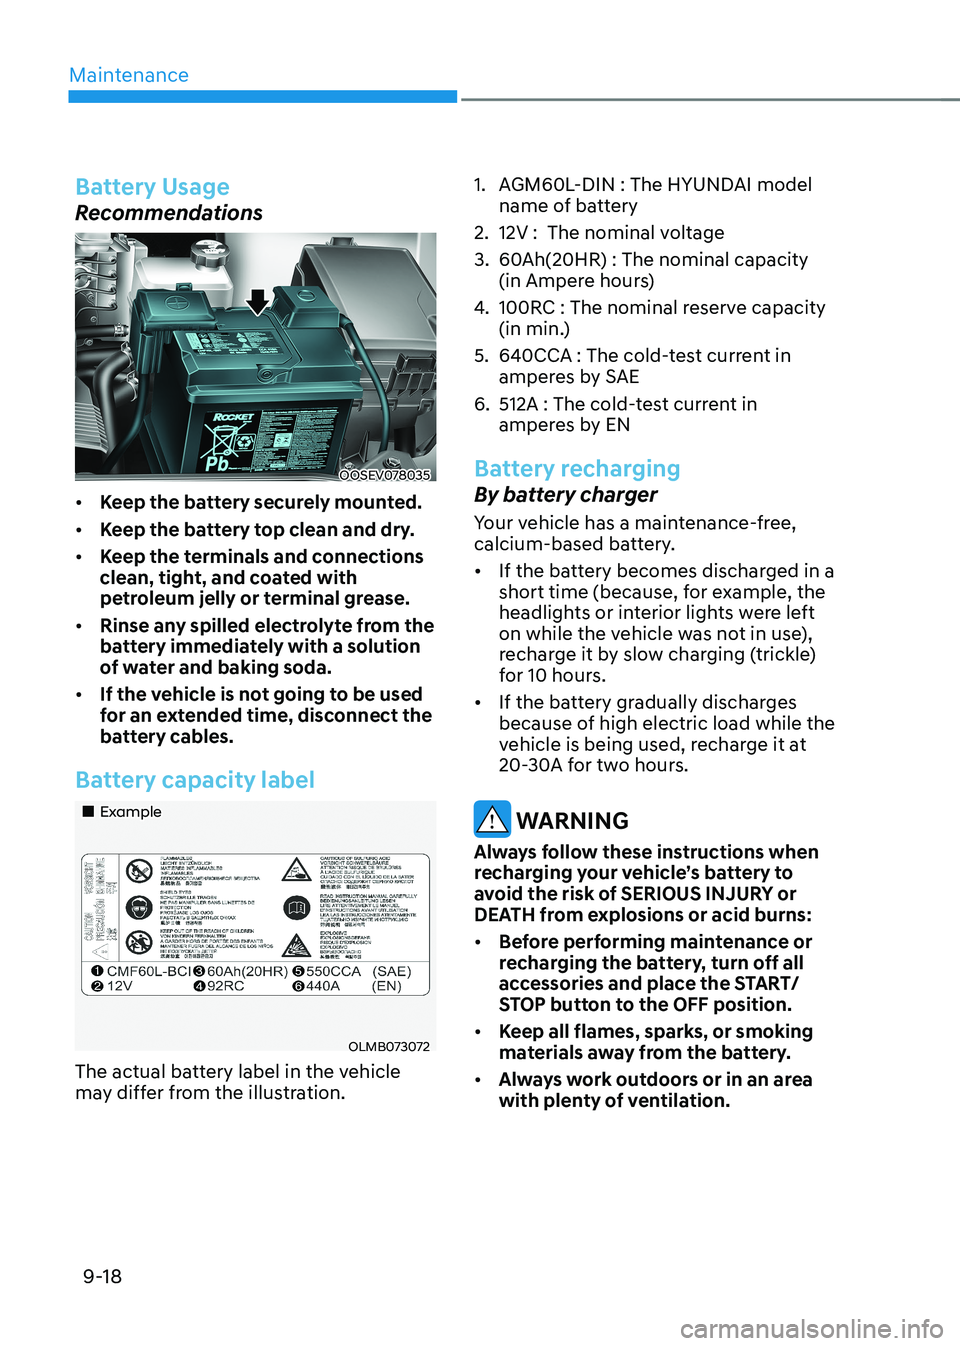 HYUNDAI KONA EV 2023  Owners Manual Maintenance
9-18
Battery Usage
Recommendations
OOSEV078035
•	 Keep the battery securely mounted.
•	 Keep the battery top clean and dry.
•	 Keep the terminals and connections  
clean, tight, and 